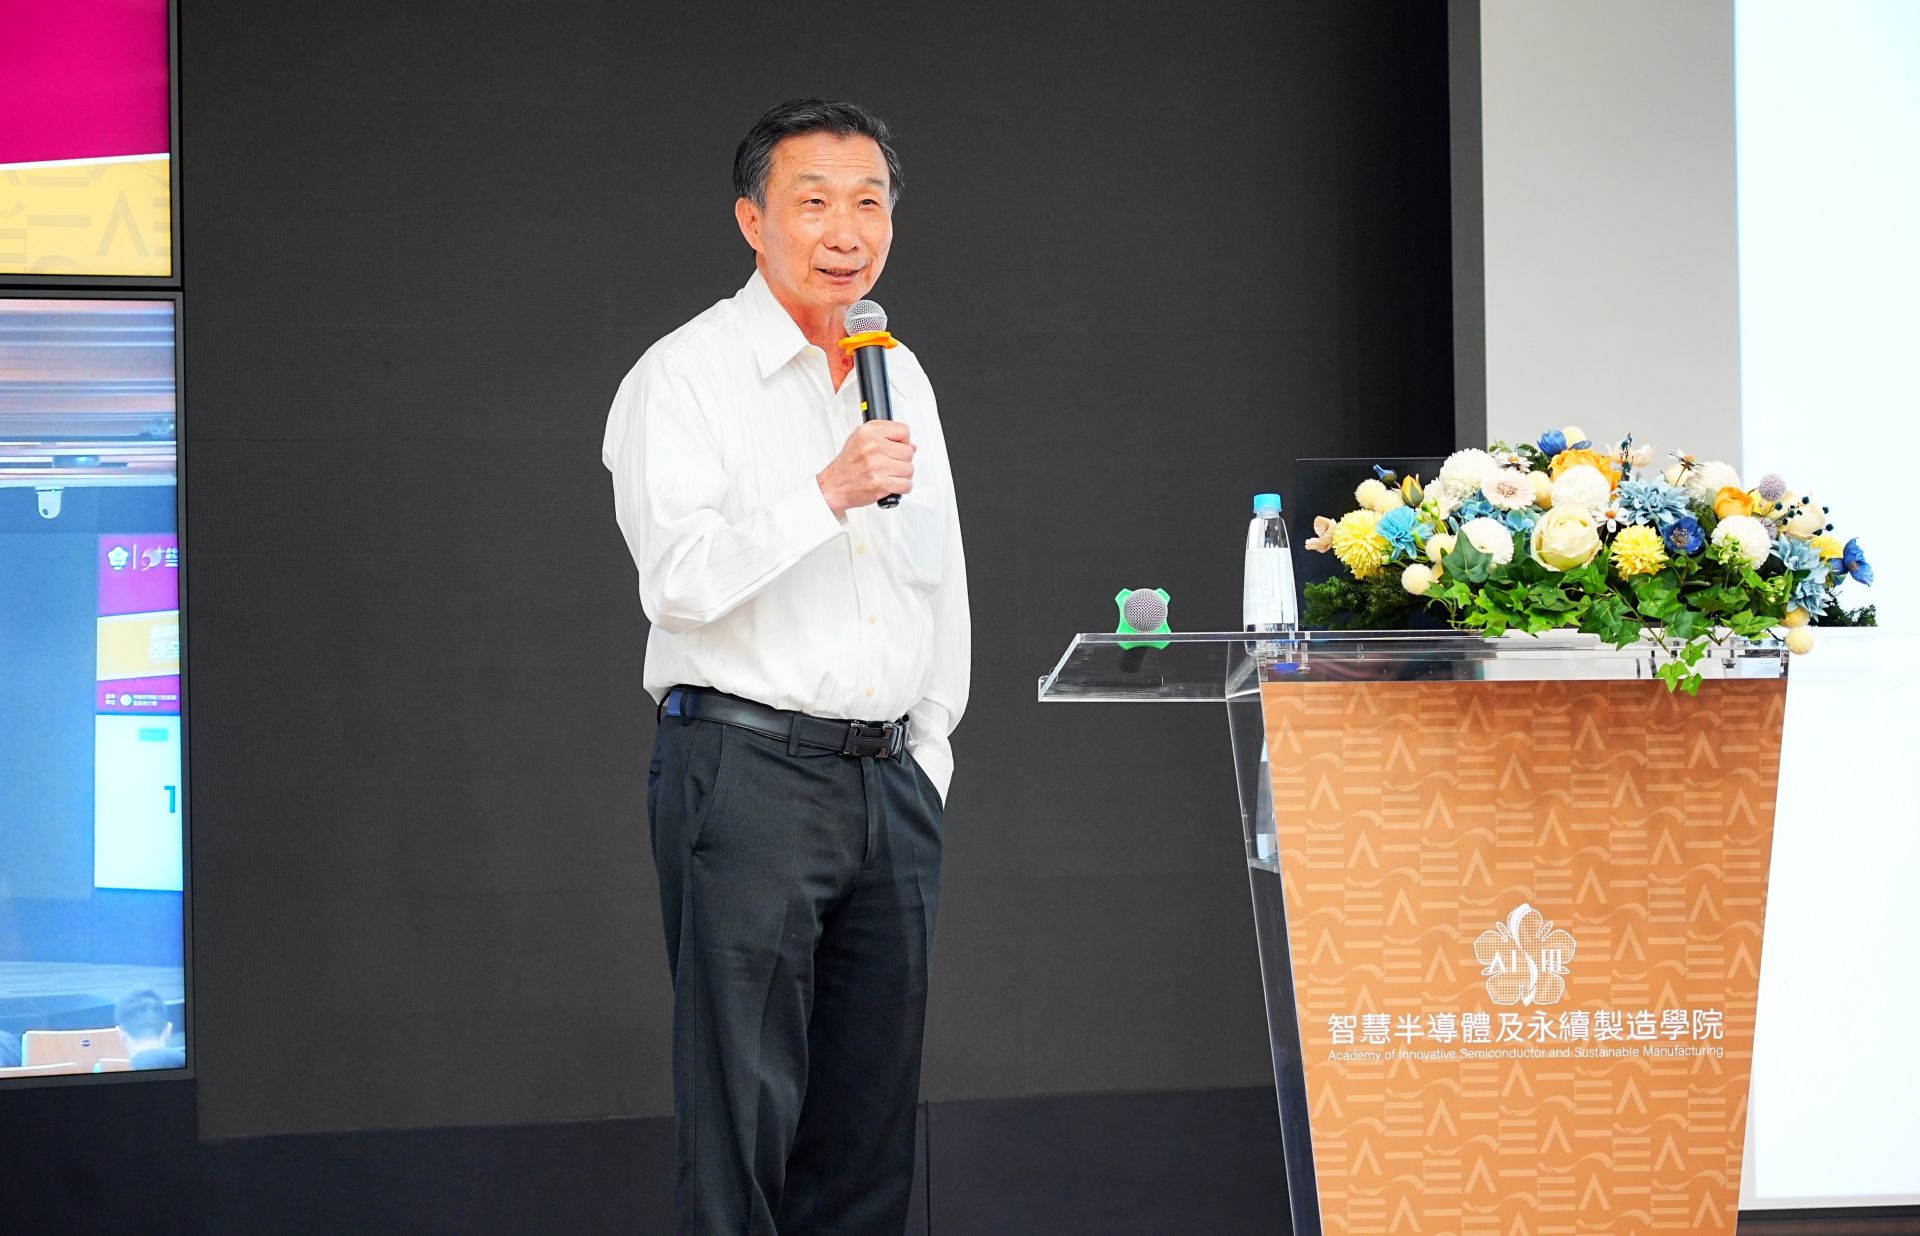 Transcom Technology Chairman Shares Entrepreneurial Journey in Concluding Semiconductor Course